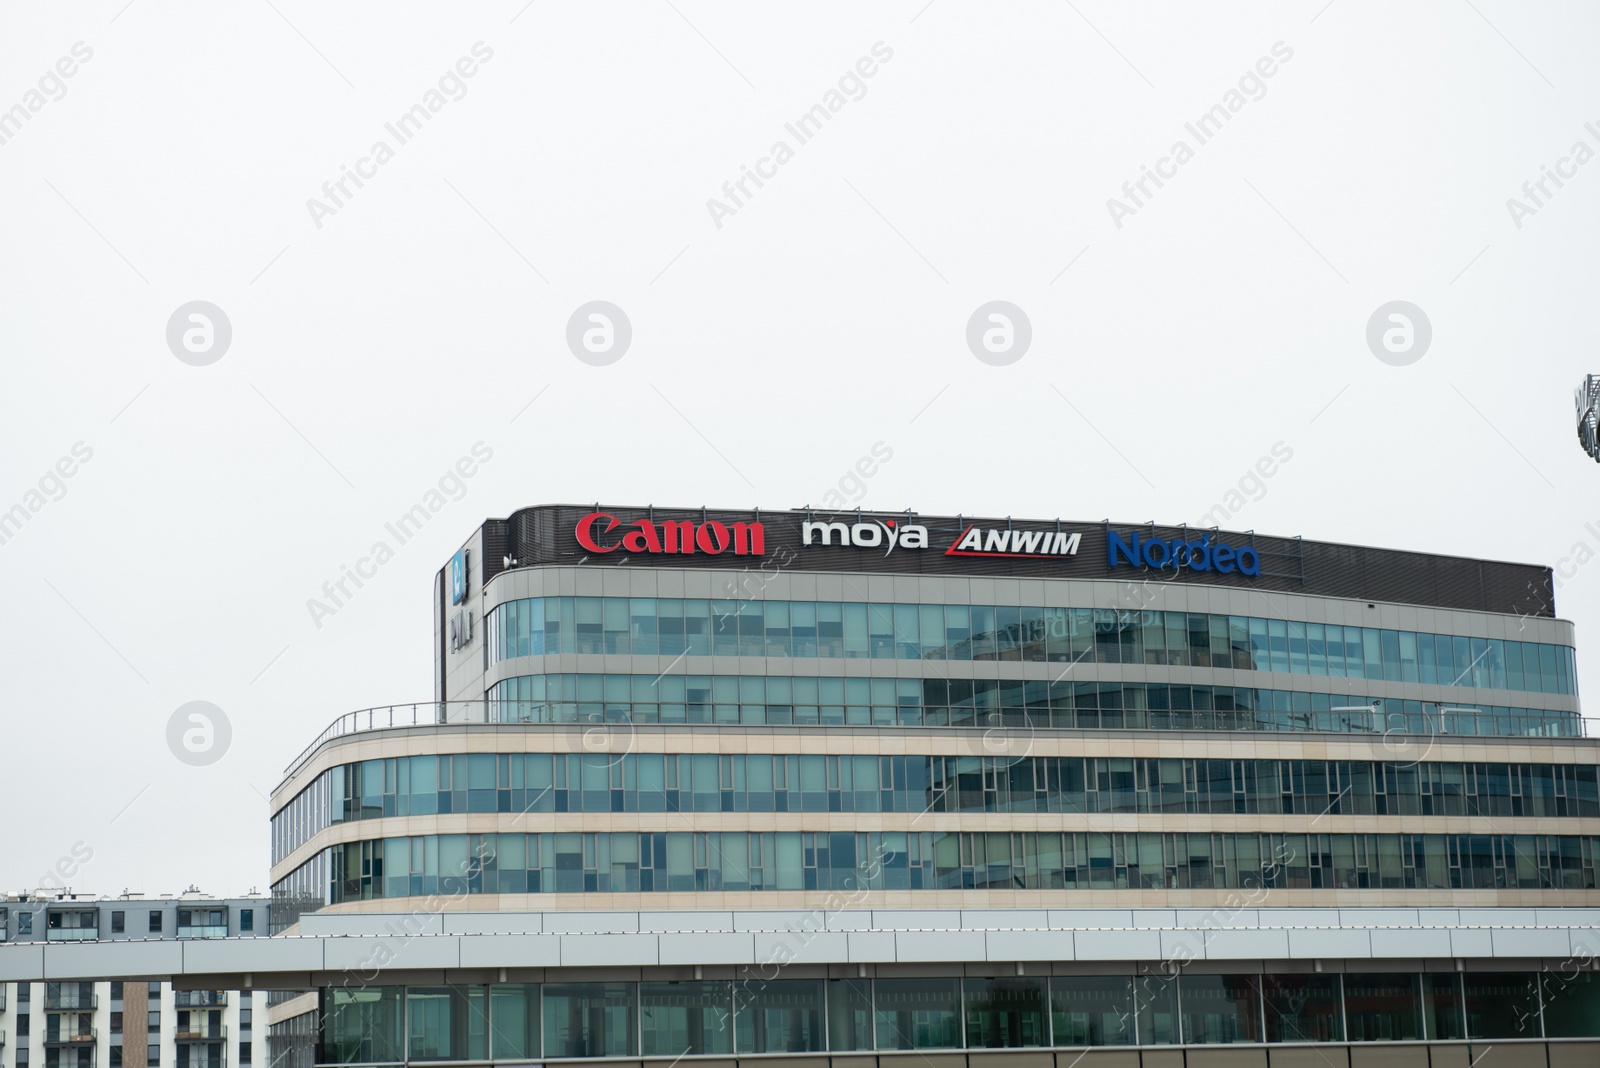 Photo of Warsaw, Poland - September 10, 2022: Building with many modern logos outdoors